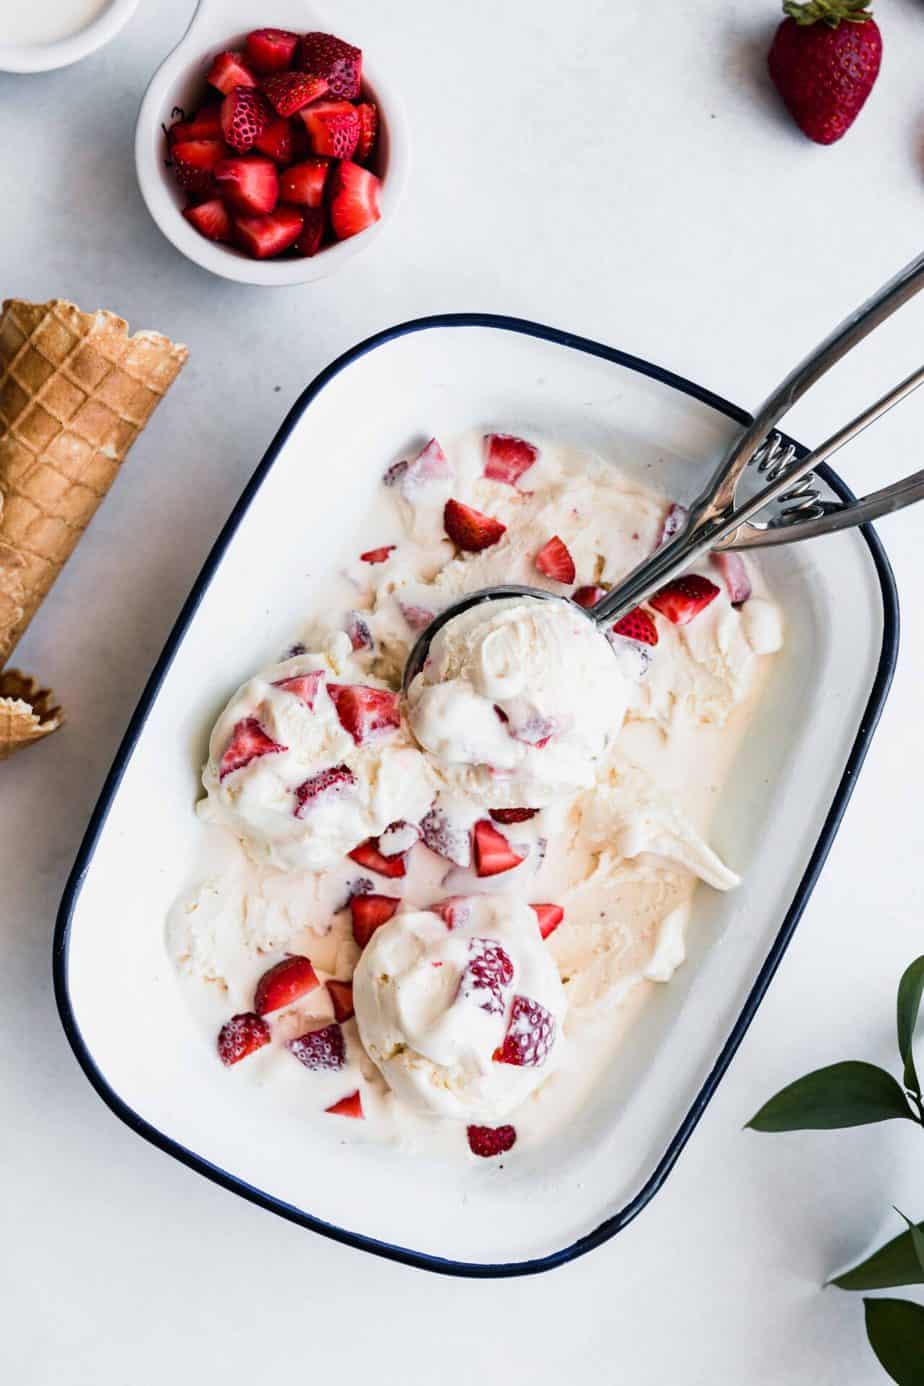 What could possibly be better than the combination of ice cream and cheesecake? This incredibly easy homemade Strawberry Cheesecake Ice Cream recipe uses only a few ingredients and makes the most delicious and creamy ice cream ever. 